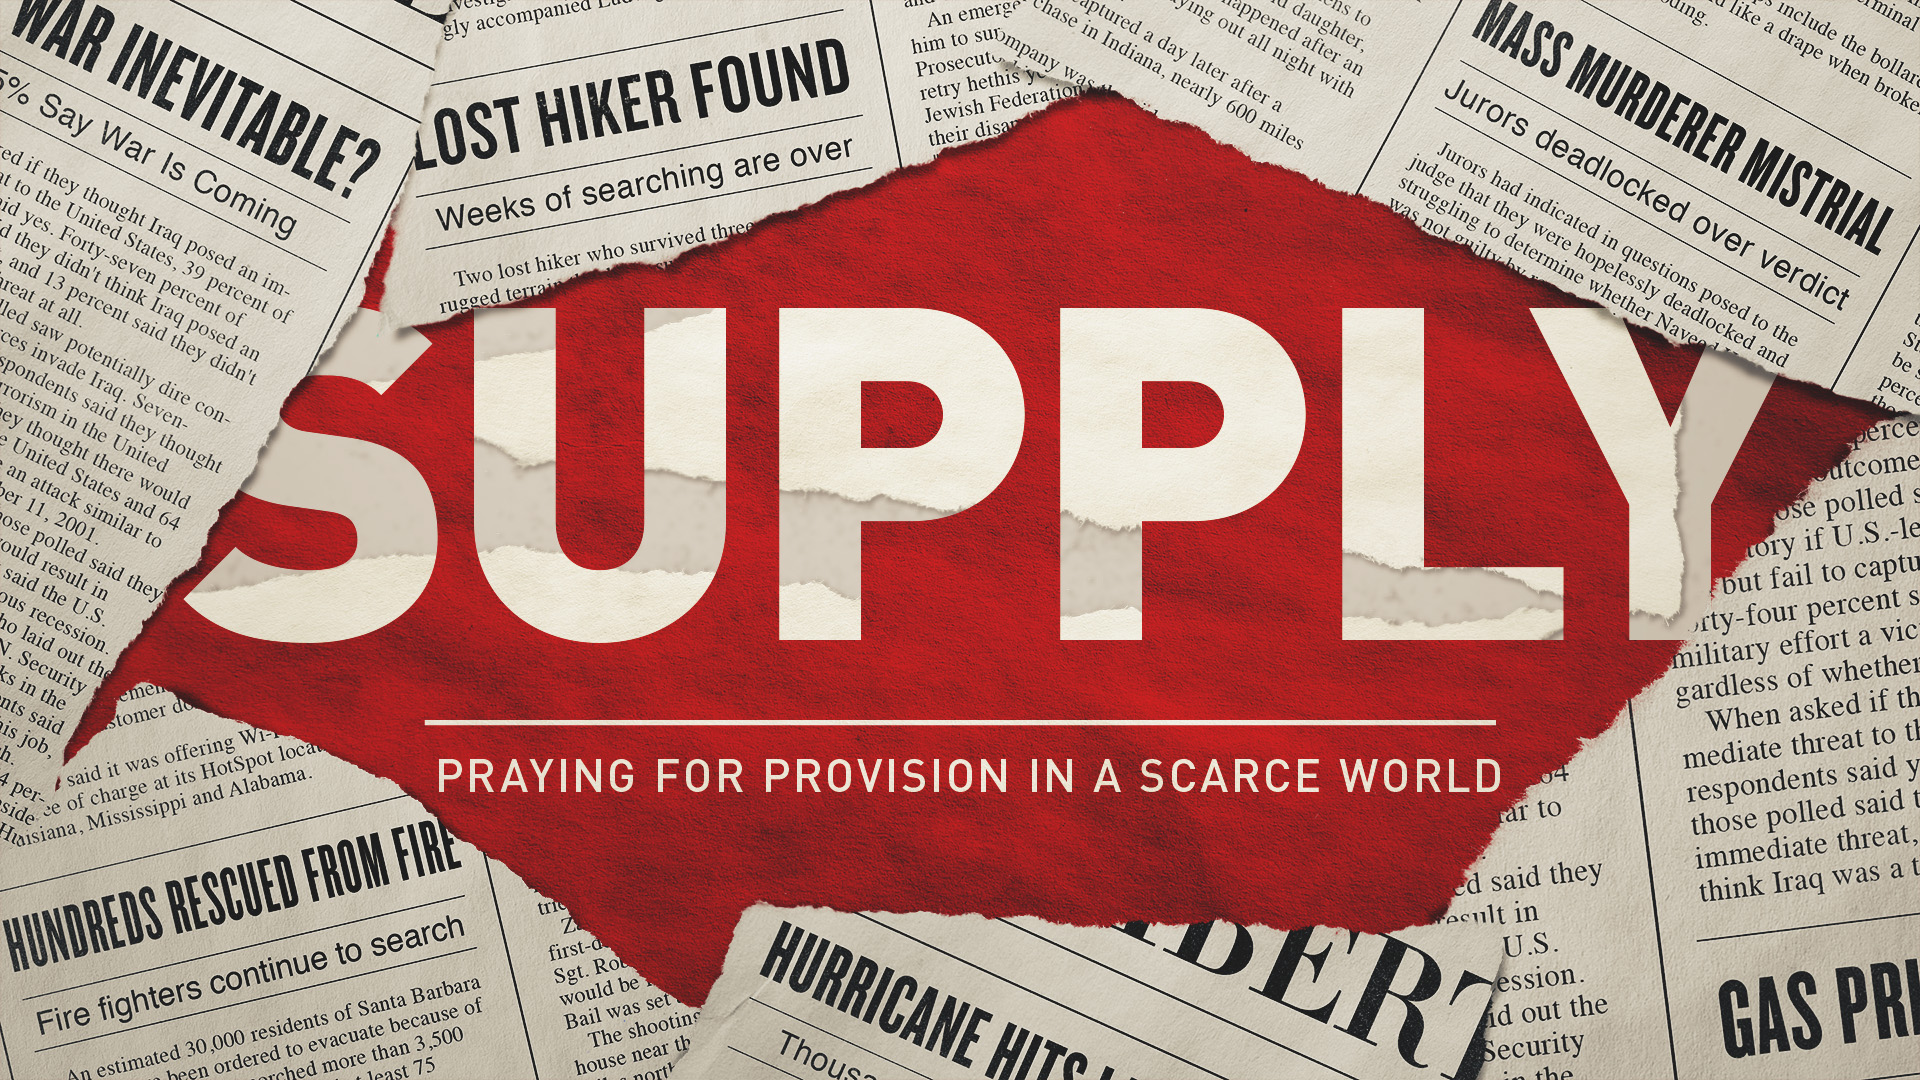 Praying for Provision in a Scarce World